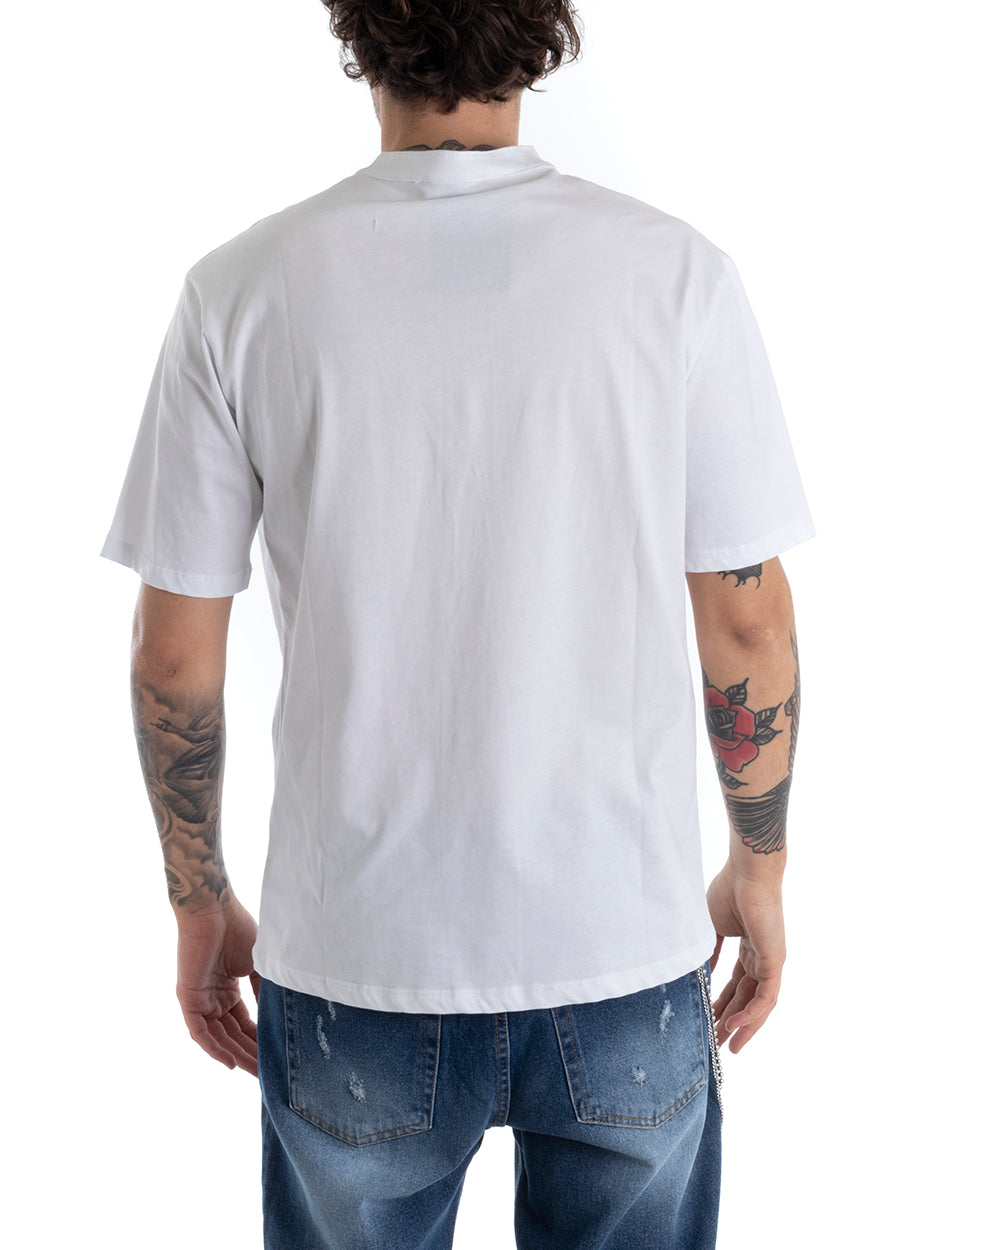 Men's T-shirt Button Collar Solid Color Short Sleeve White Casual GIOSAL